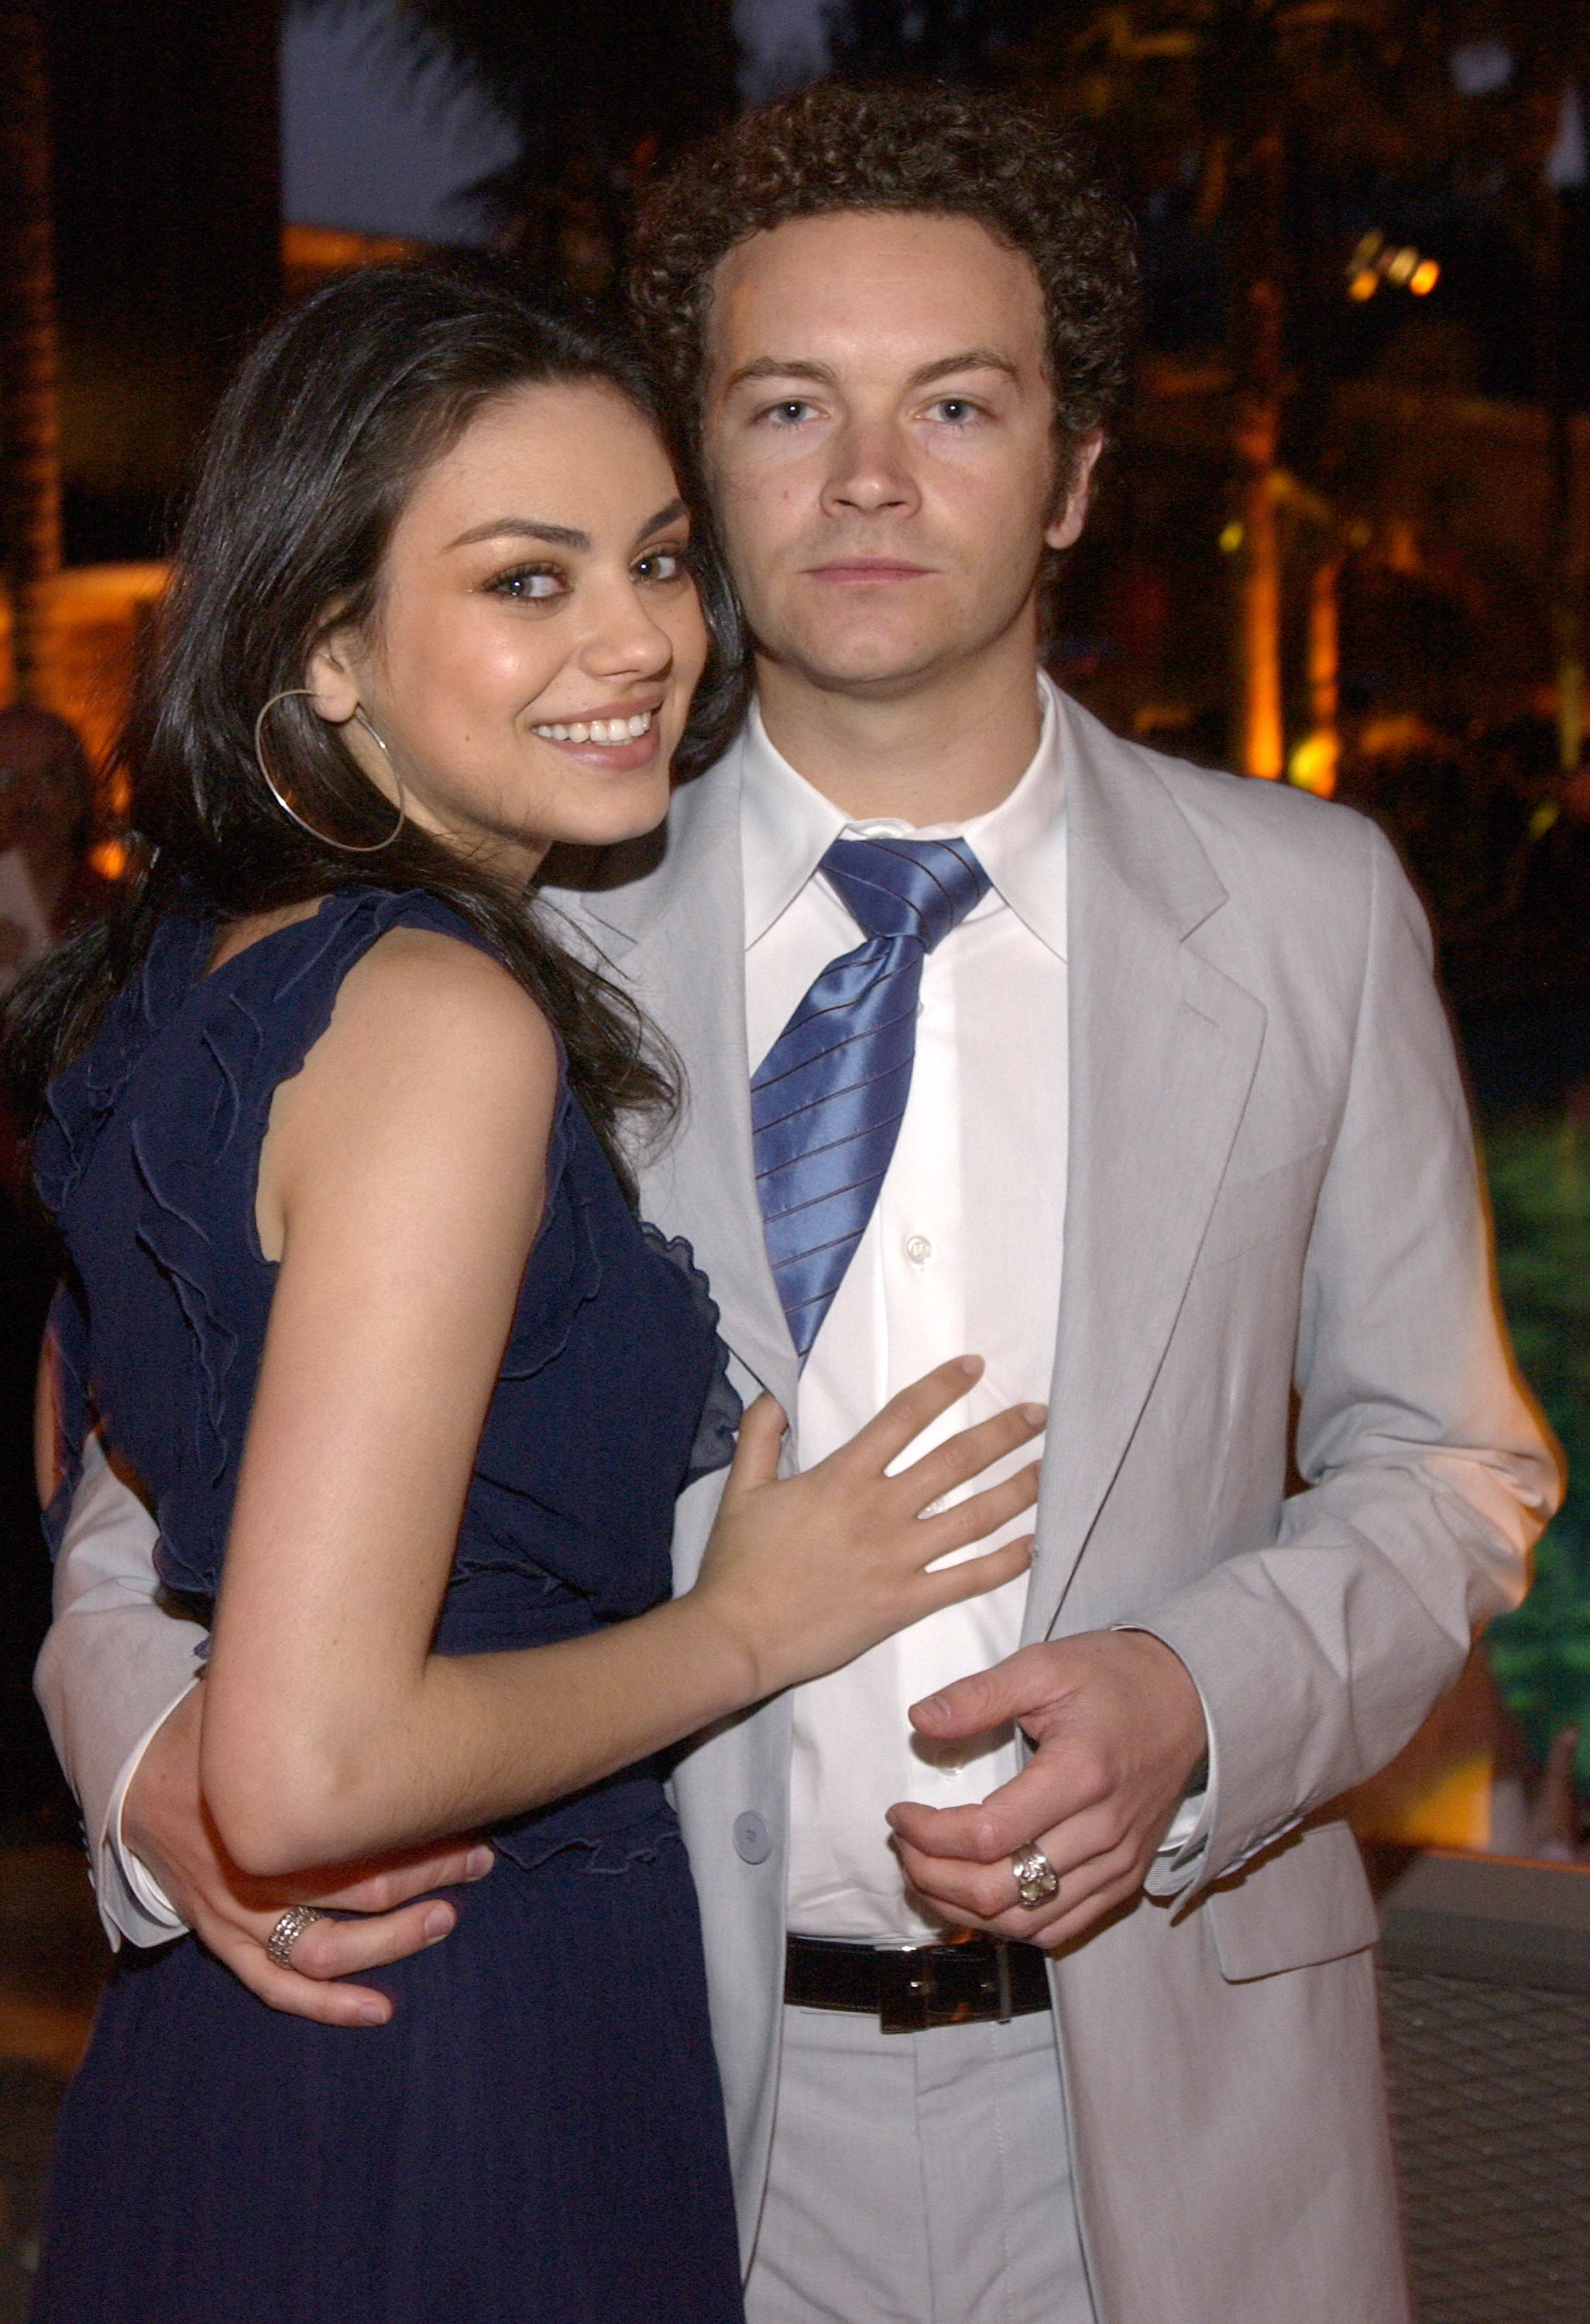 mila and danny posing together for a photo at an event